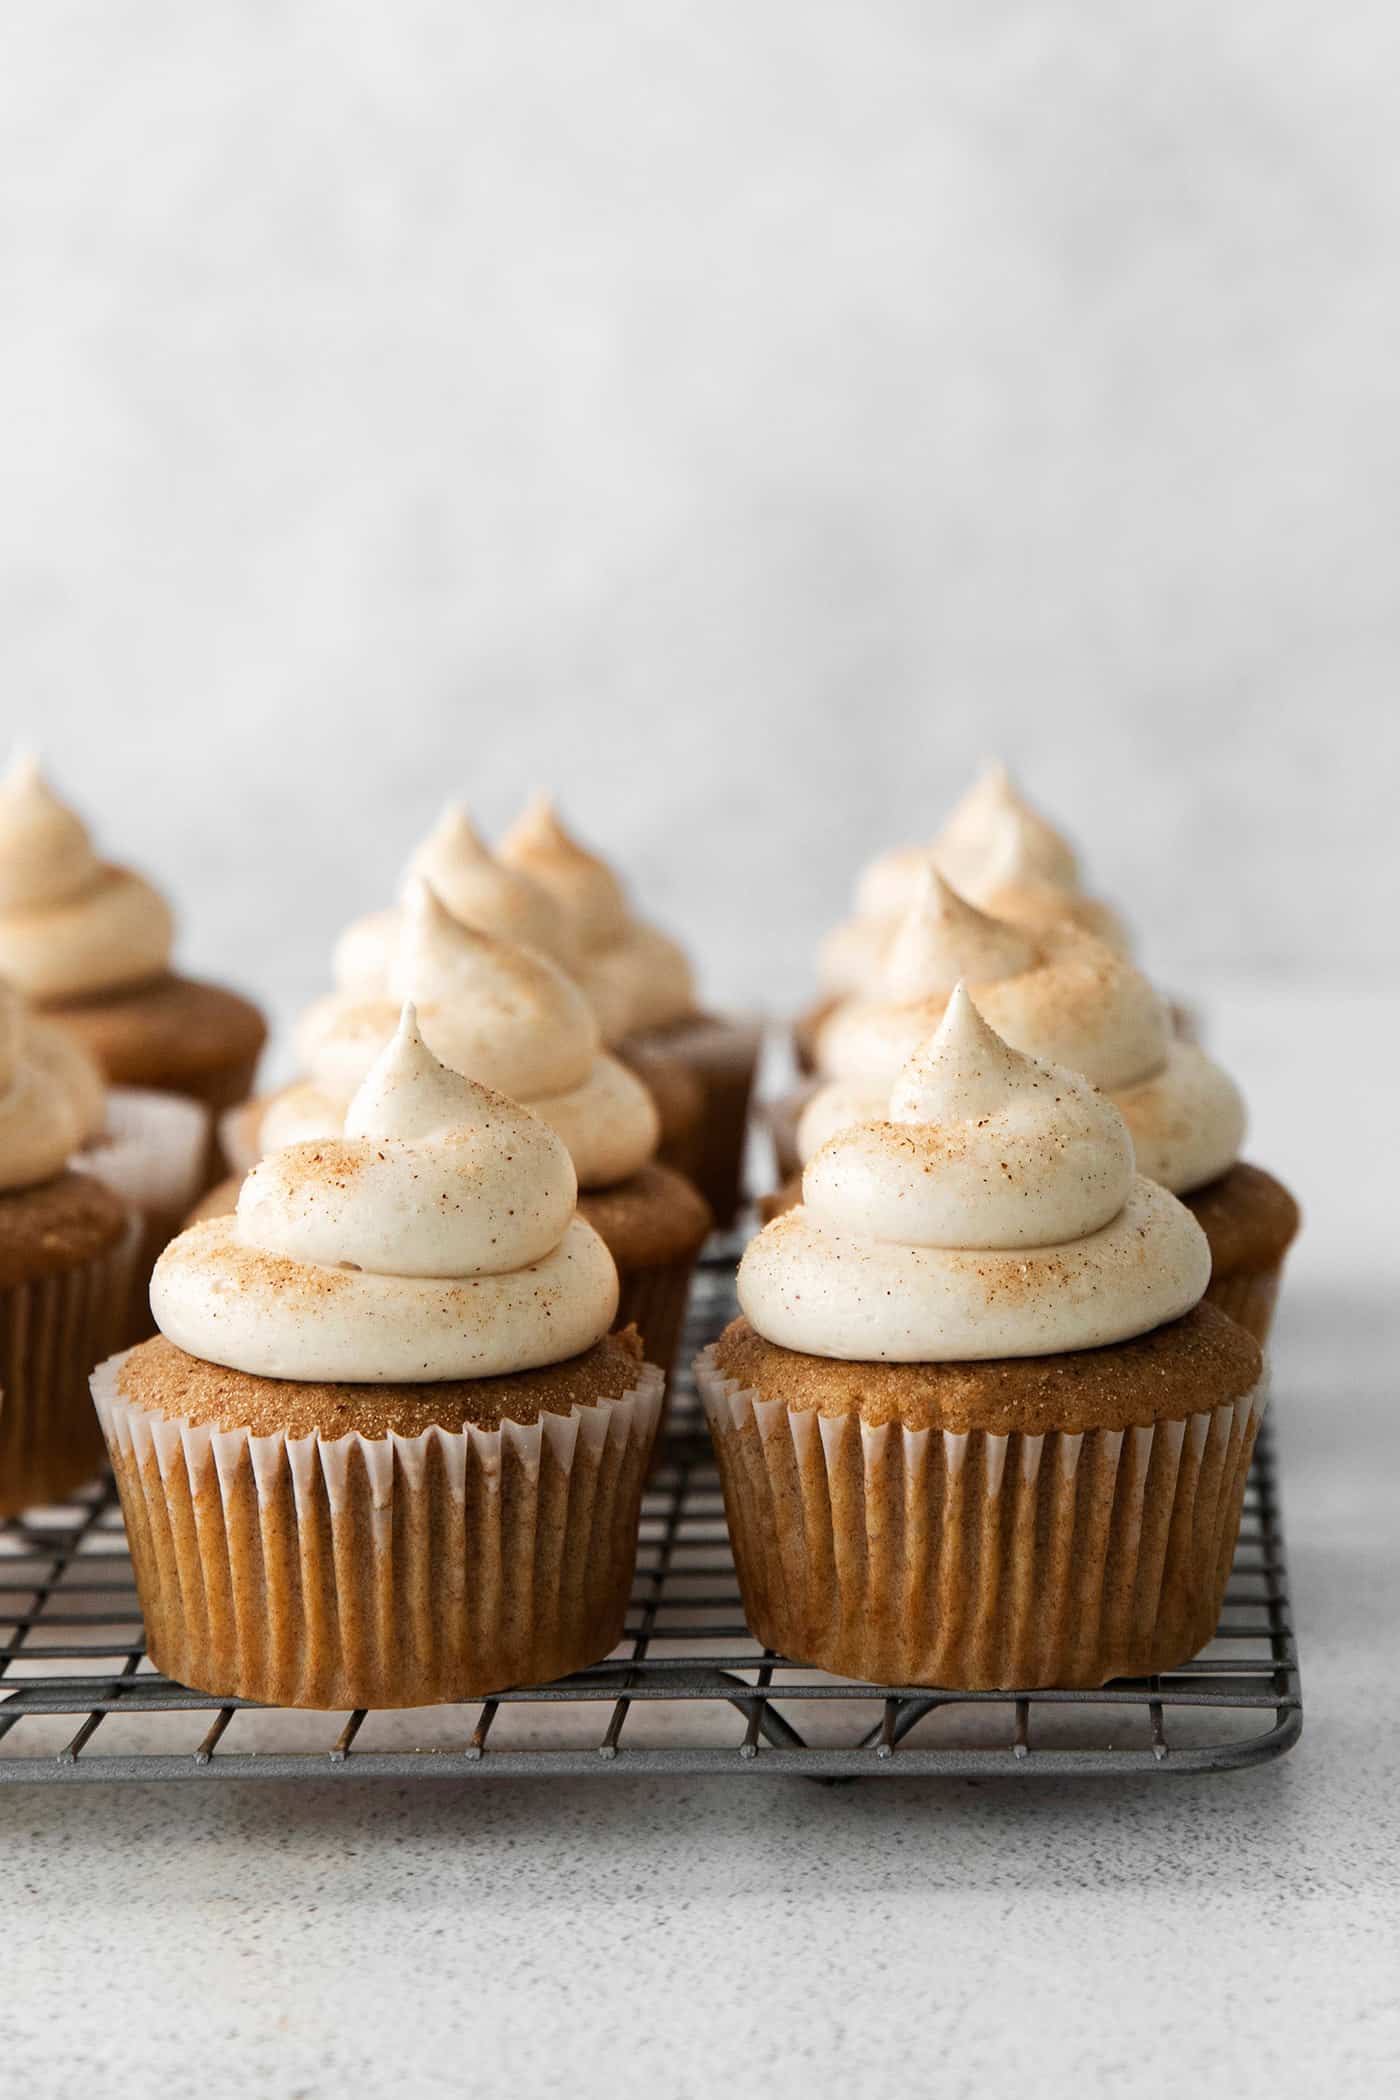 Snickerdoodle cupcakes with cream cheese frosting on a cooling 